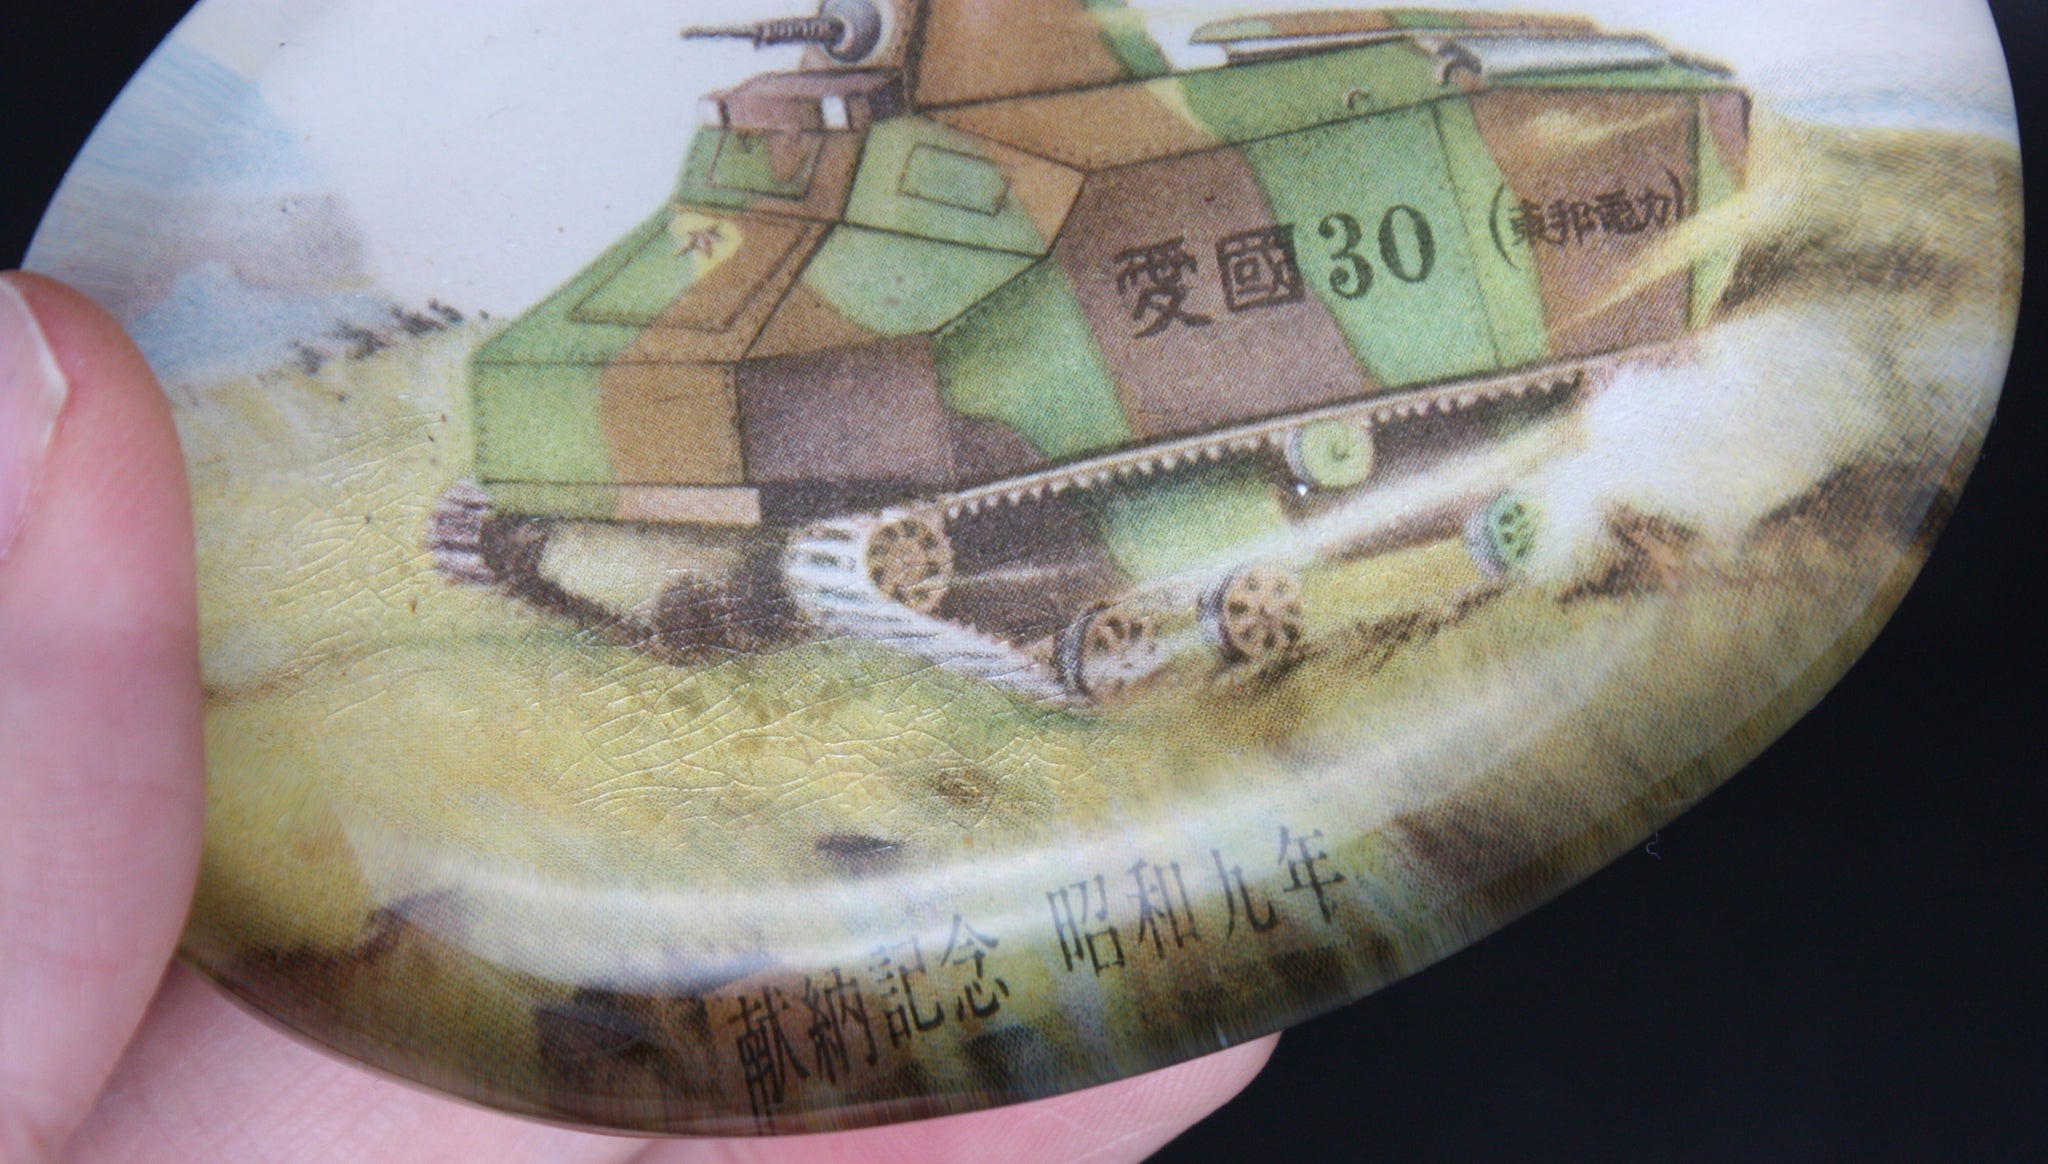 Very Rare Antique Japanese Military Contributed Tank Commemoration Paper Weight